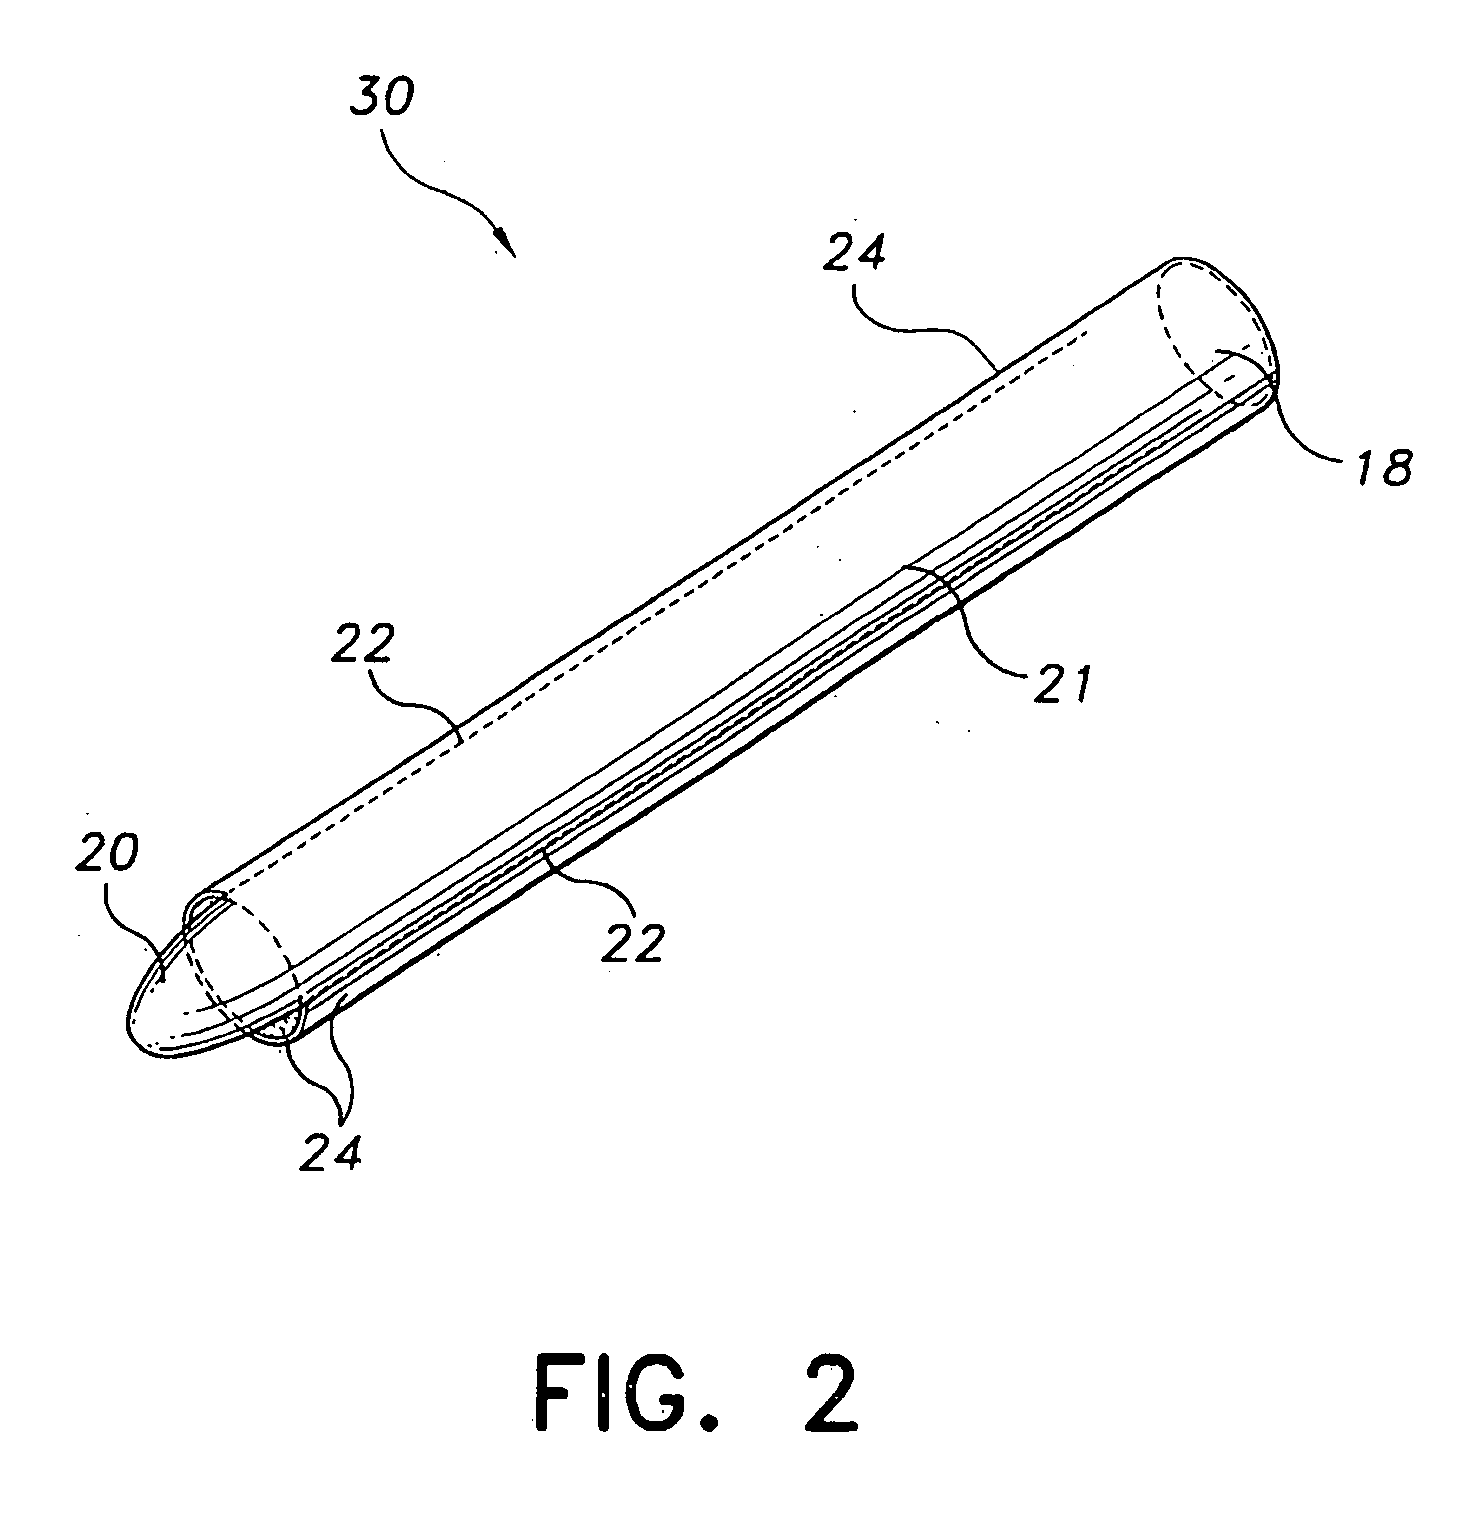 Absorbent article for protecting clothing and relieving female urinary incontinence